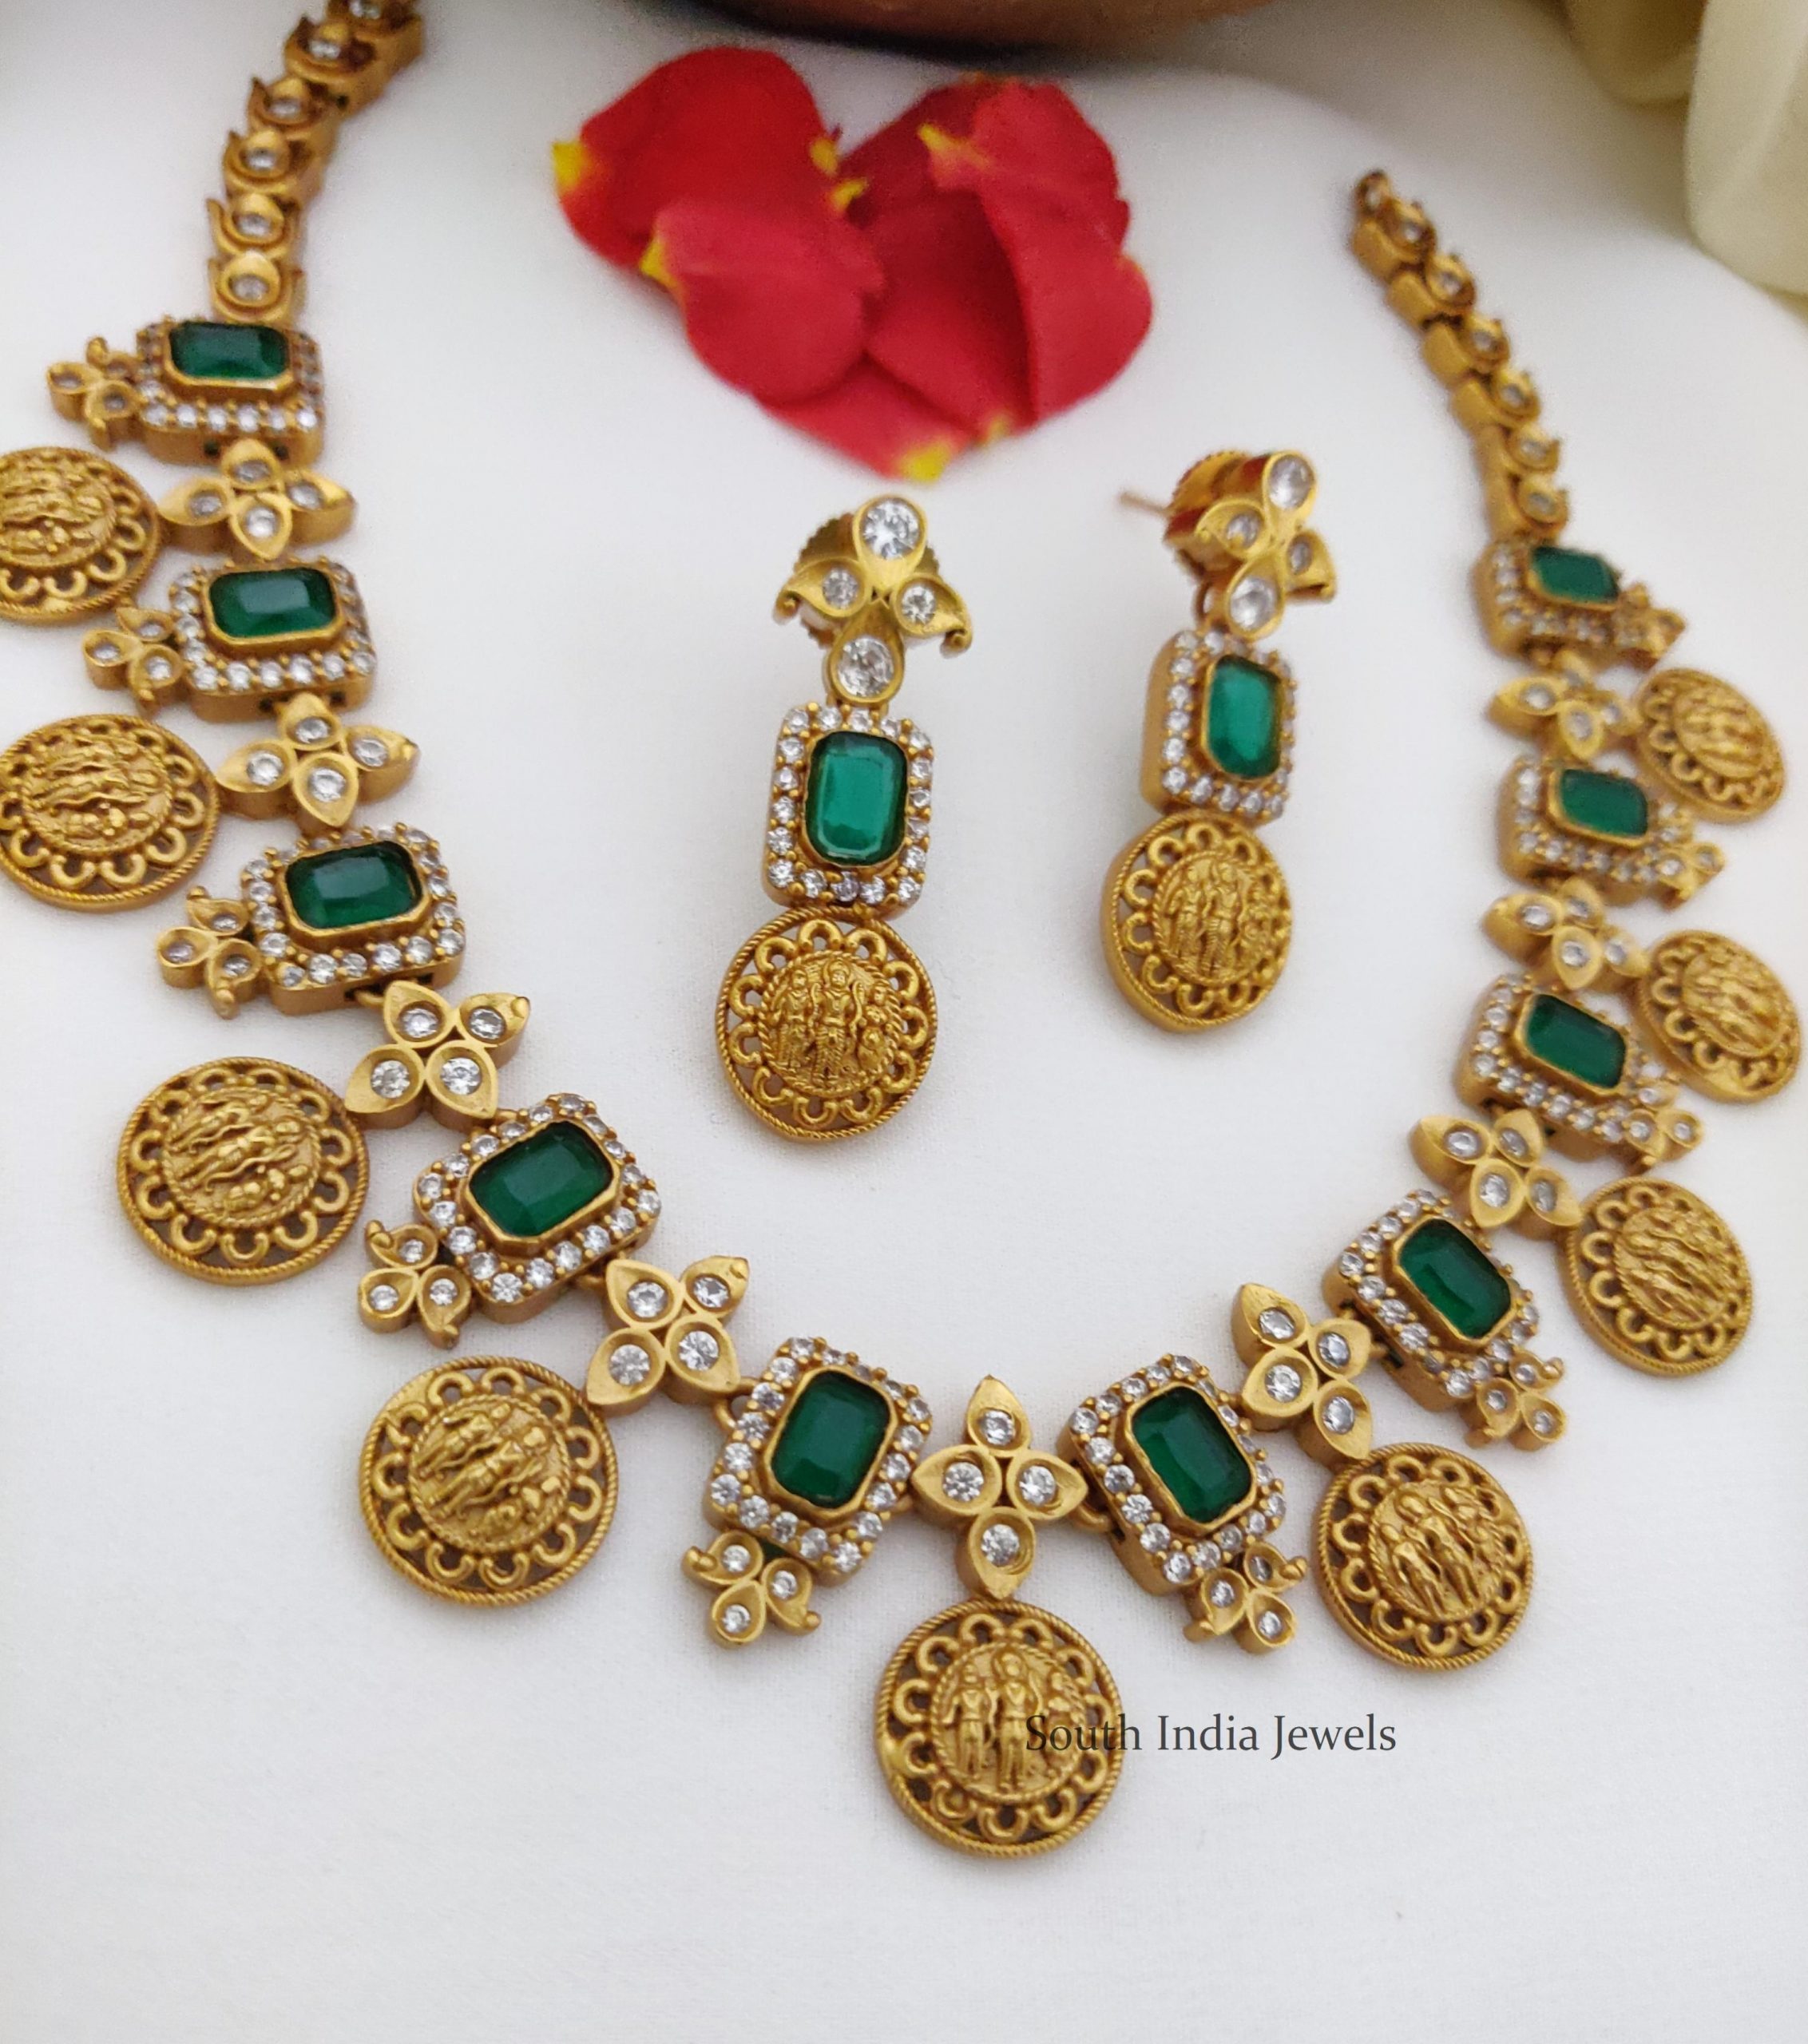 Traditional Ramparivar Necklace - South India Jewels